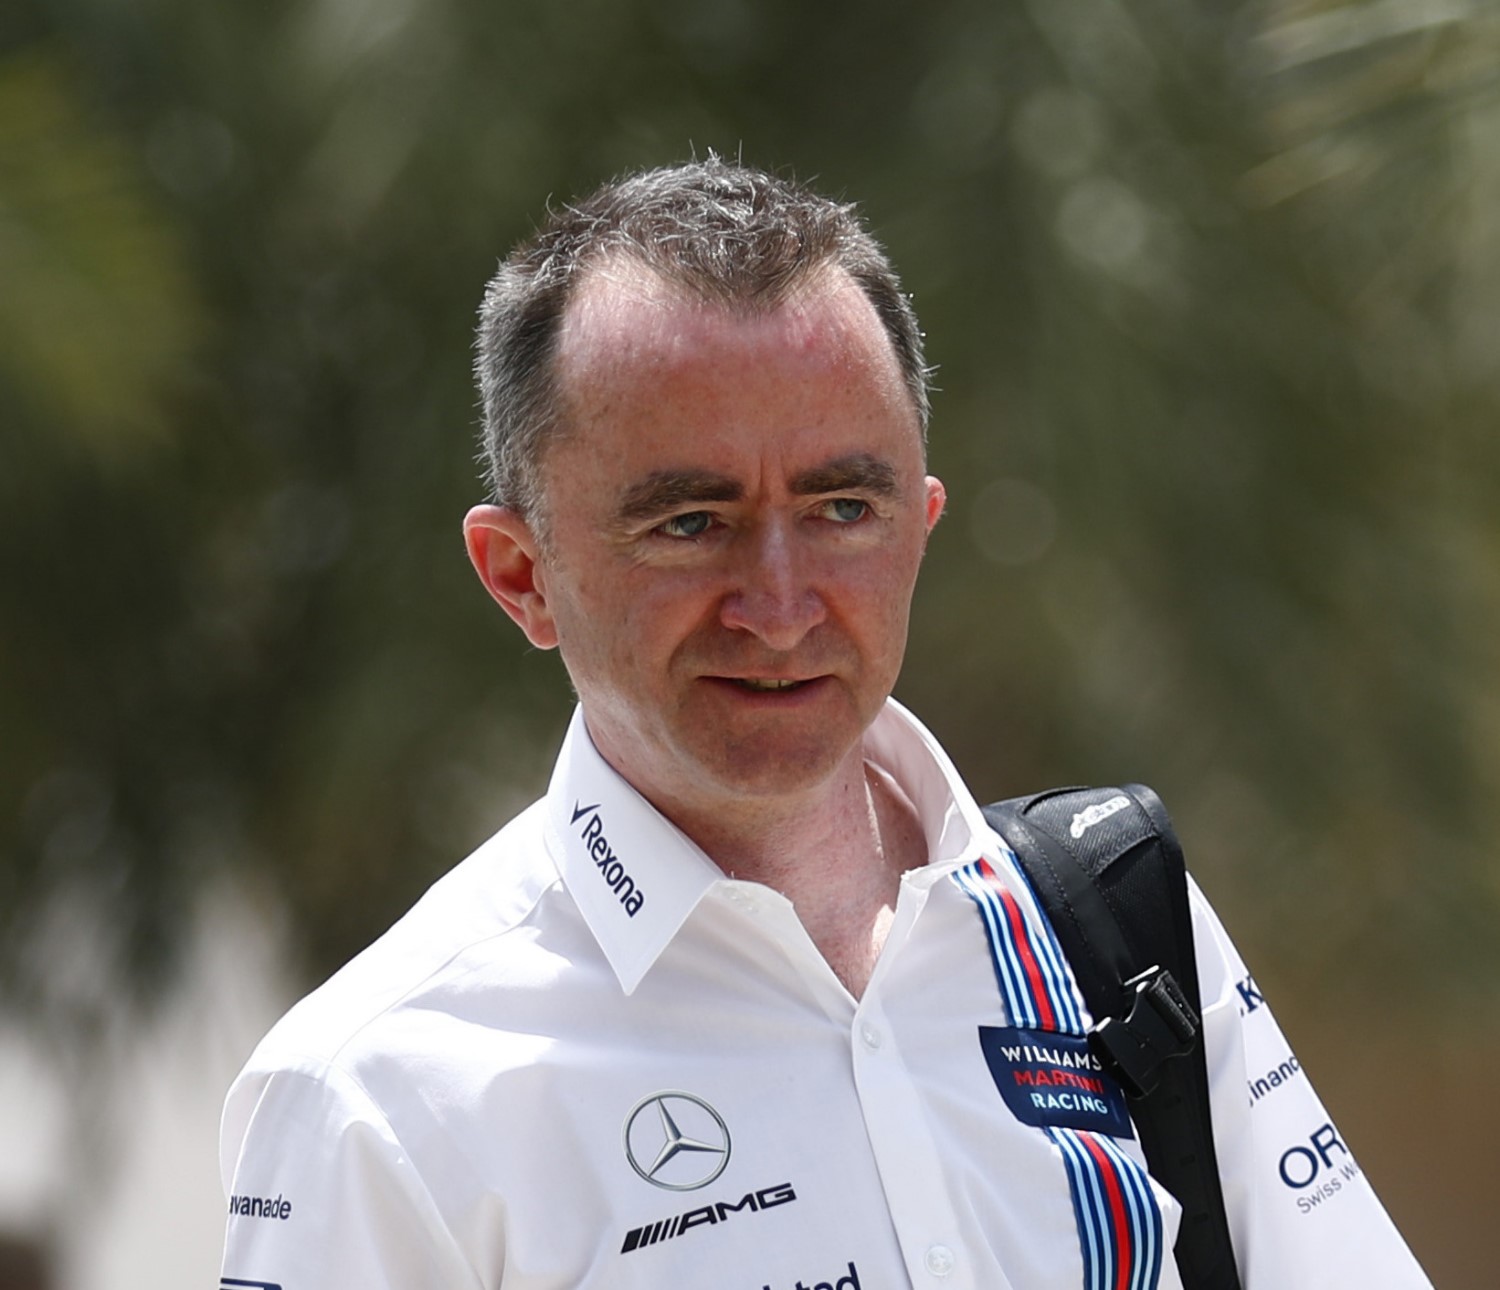 Paddy Lowe rode the coattails of Aldo Costa at Mercedes. Now at Williams Lowe's car design is a sluf